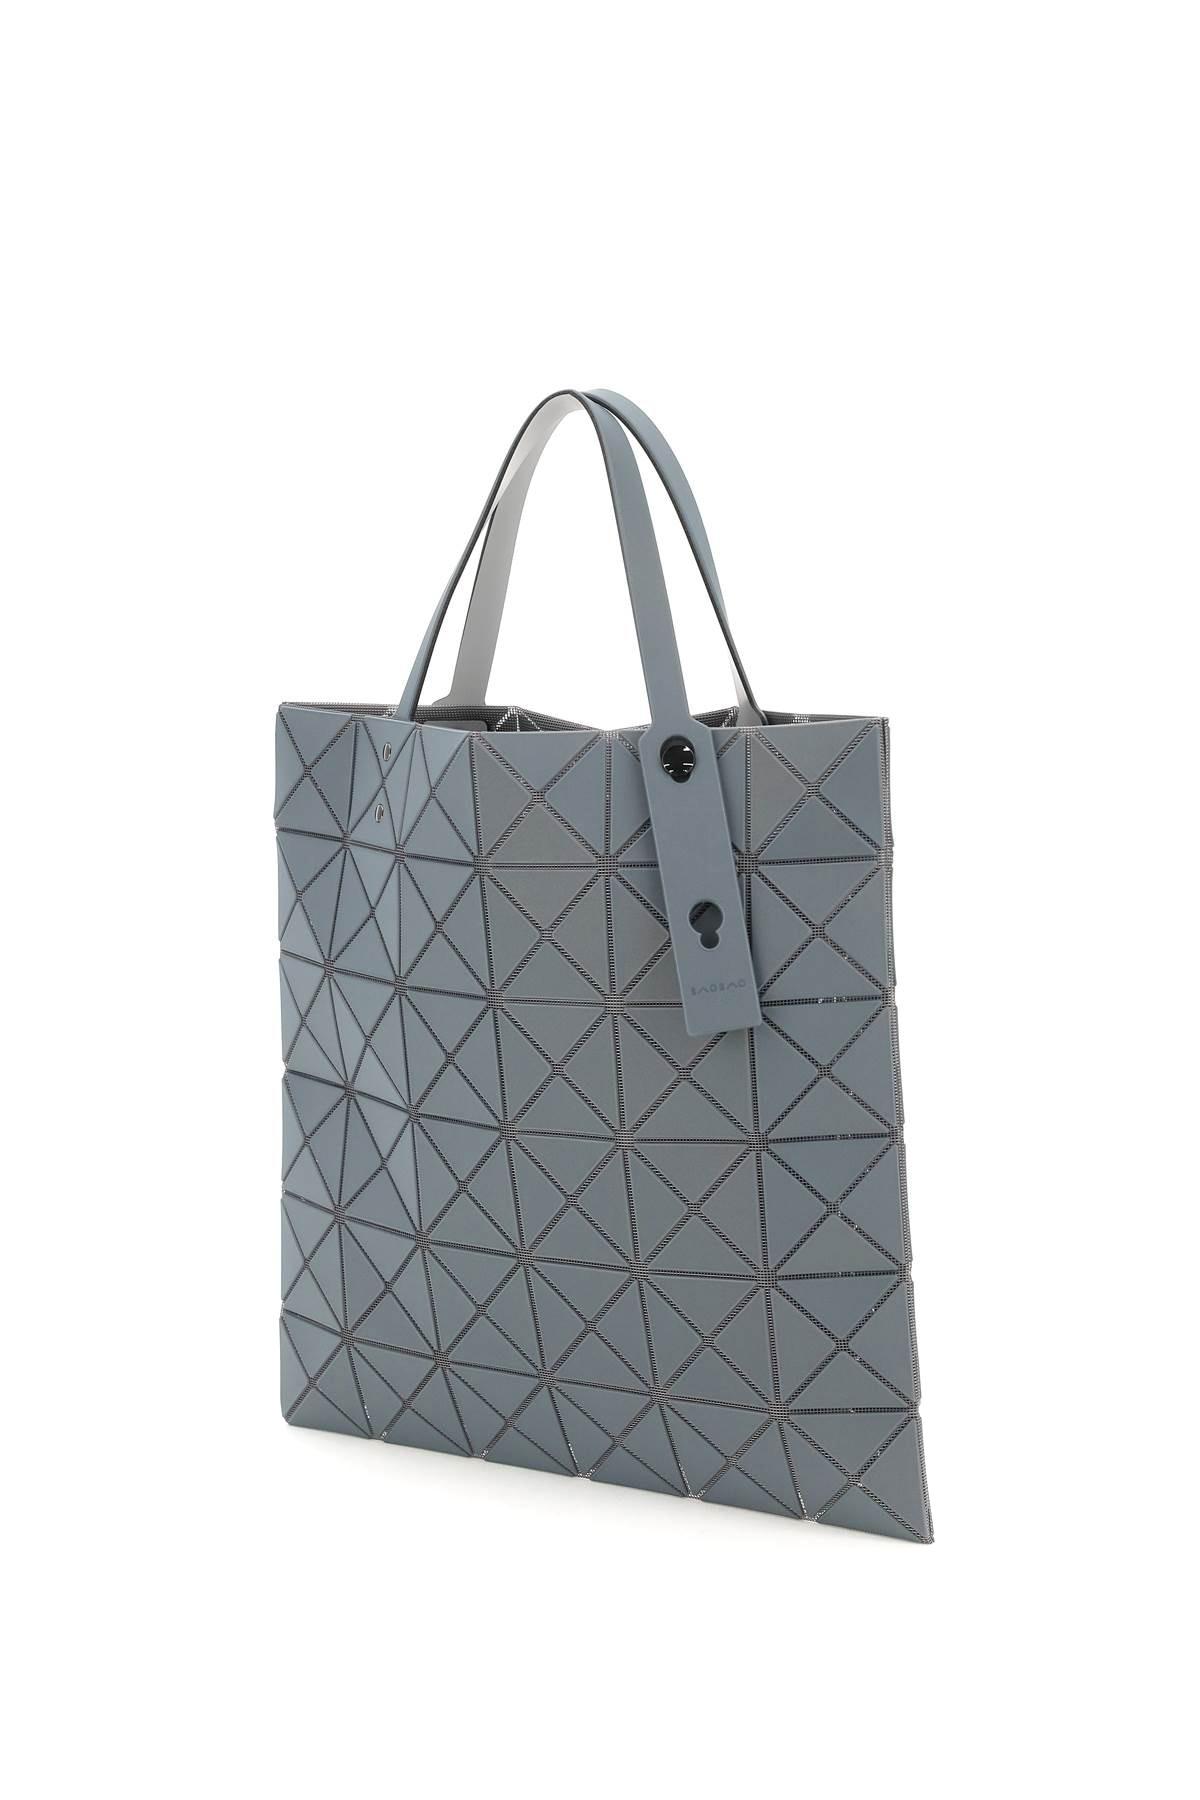 Bao Bao Issey Miyake Lucent Frost Tote Bag Os Technical in Gray | Lyst